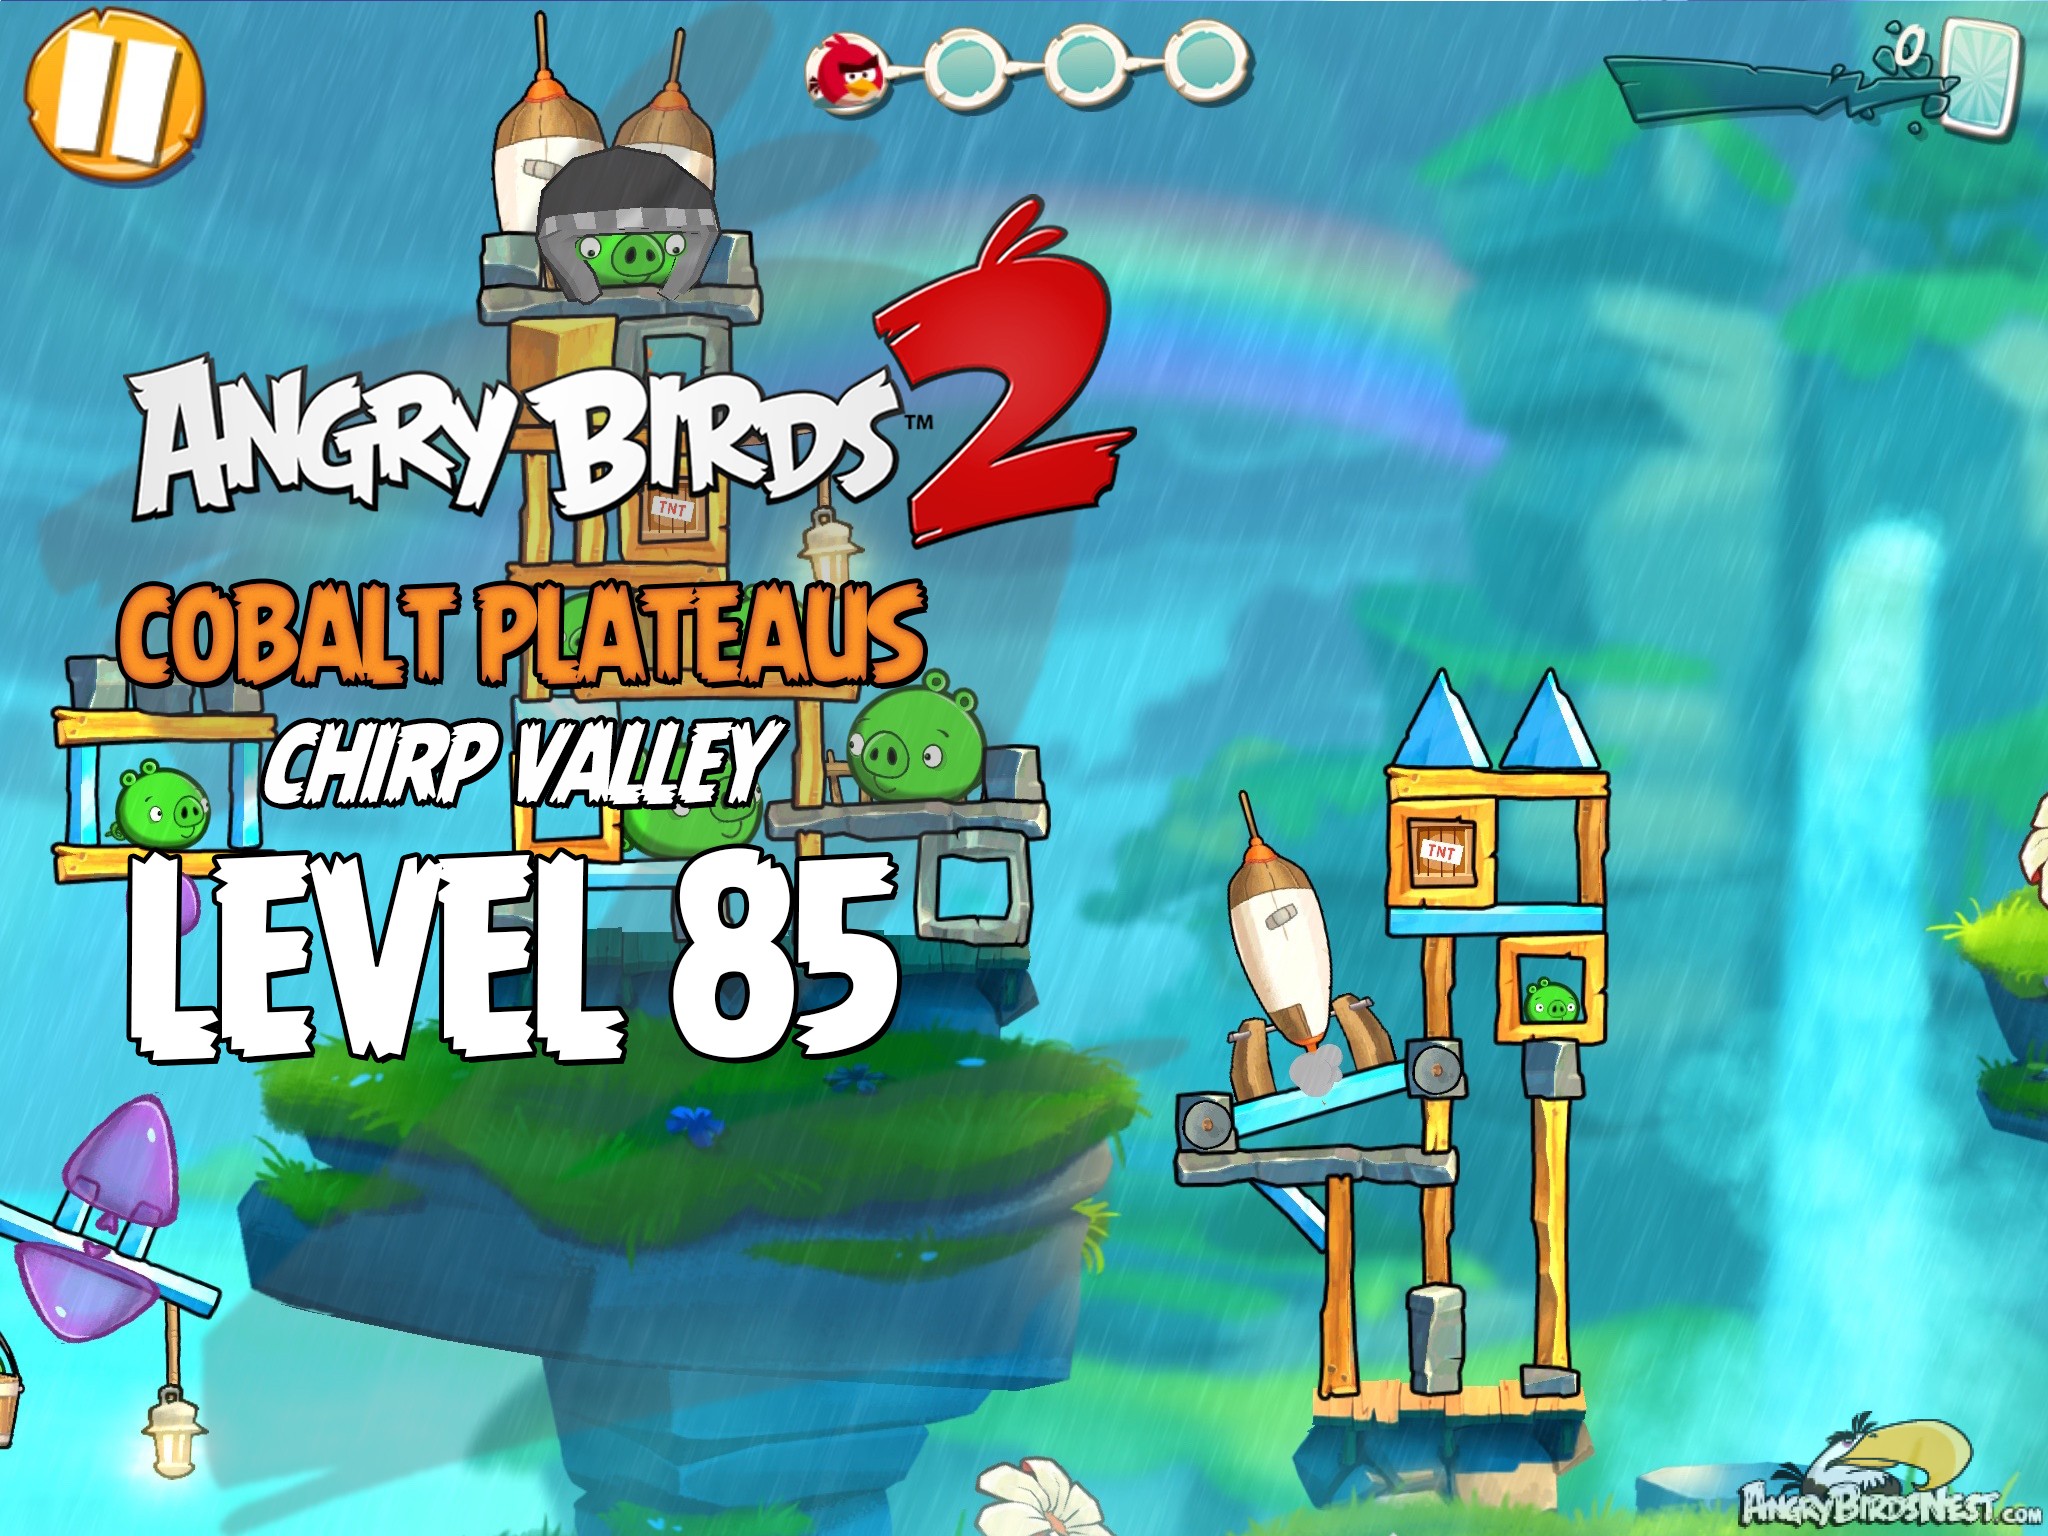 Angry Birds 2 Cobalt Plateaus Chirp Valley Level 85